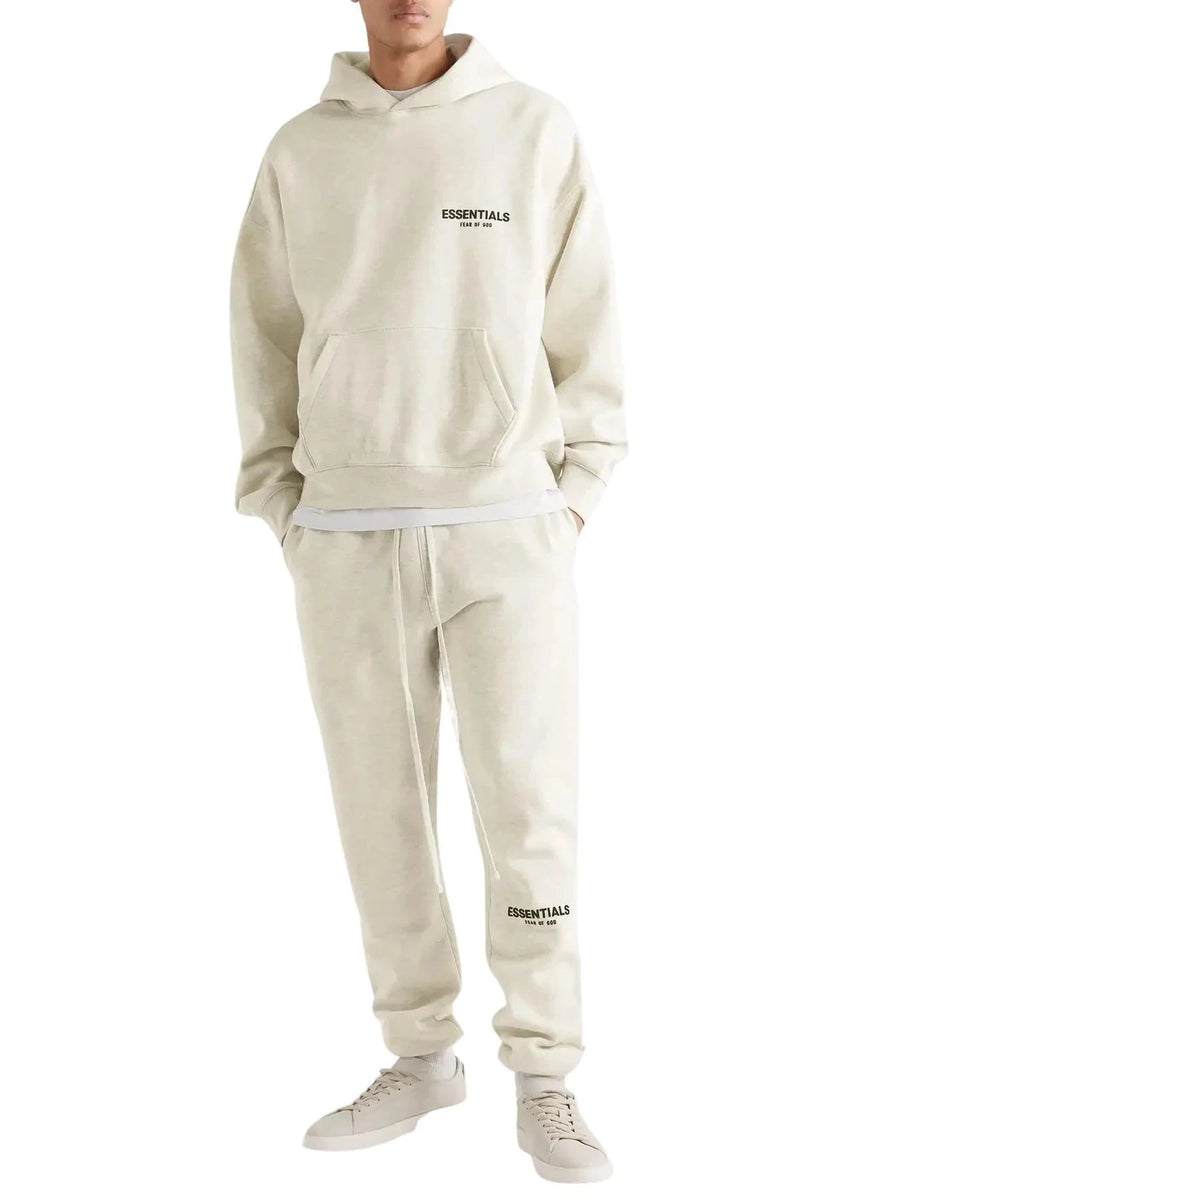 FEAR OF GOD ESSENTIALS LIGHT HEATHER OATMEAL TRACKSUIT (SS22)